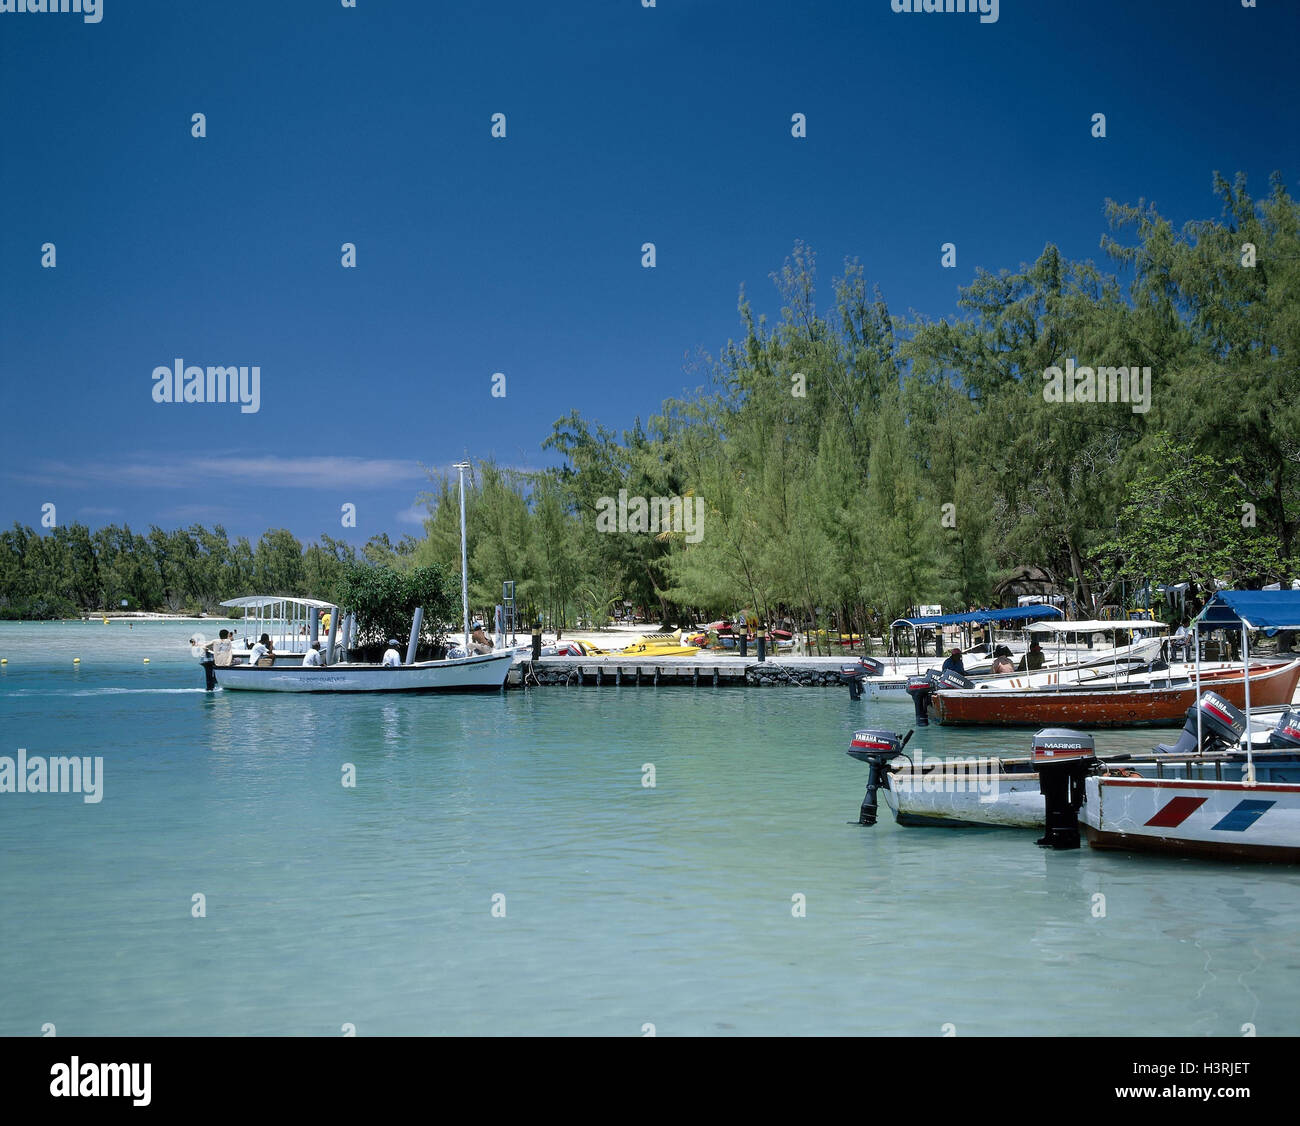 Mauritius, Ile aux Cerfs, harbour, excursion boats, tourists, Indian ocean, Maskarenen, island state, island, the east, boat, motorboats, anchor, boat trip, tourism, leisure time offers, leisure time possibilities Stock Photo